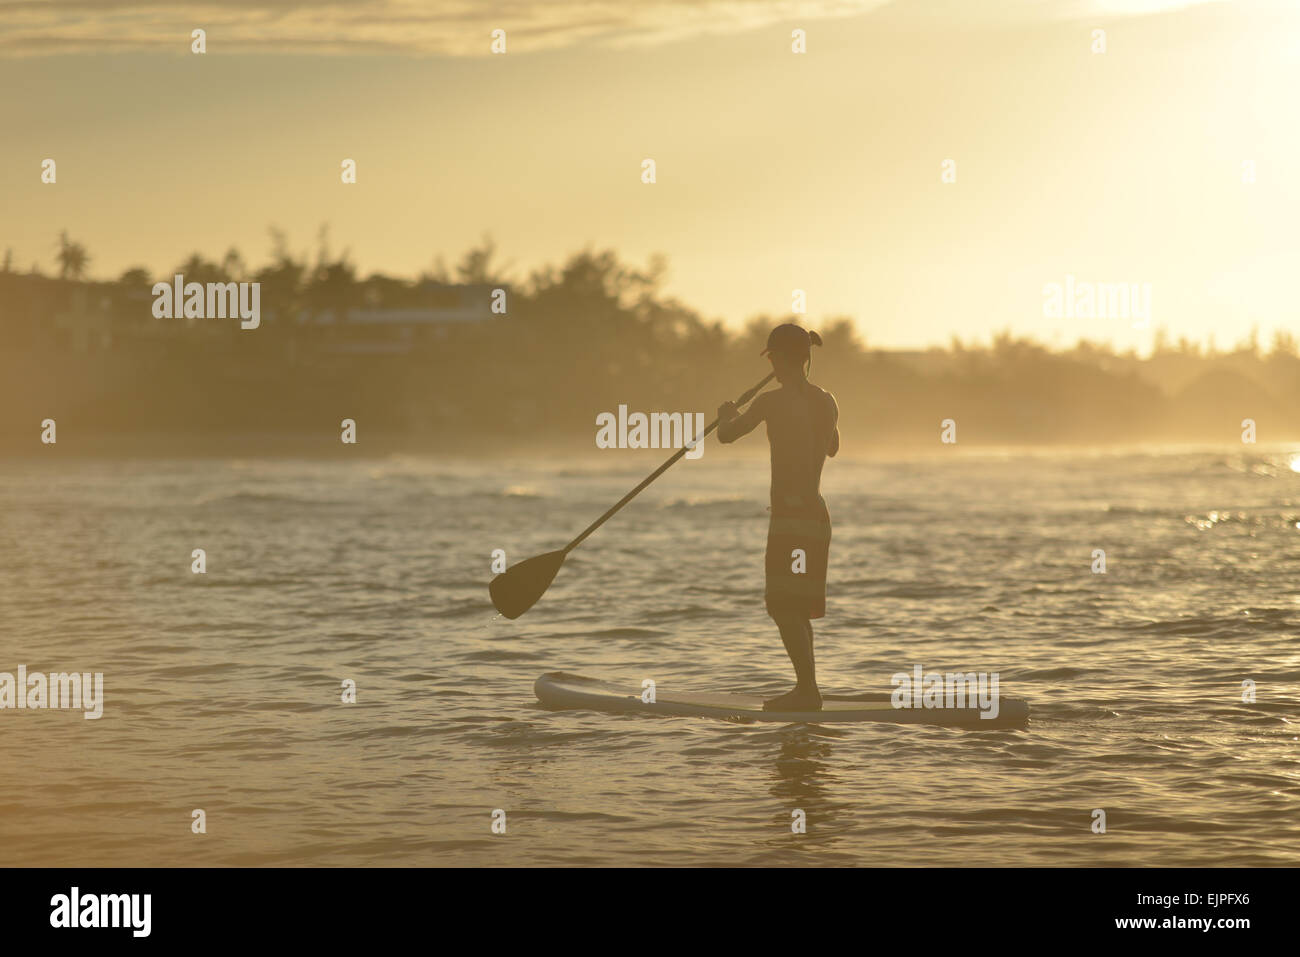 Silhouette of a man on a paddle board during a stunning sunset at Jobos beach. Isabela, Puerto Rico. Caribbean Island. Stock Photo